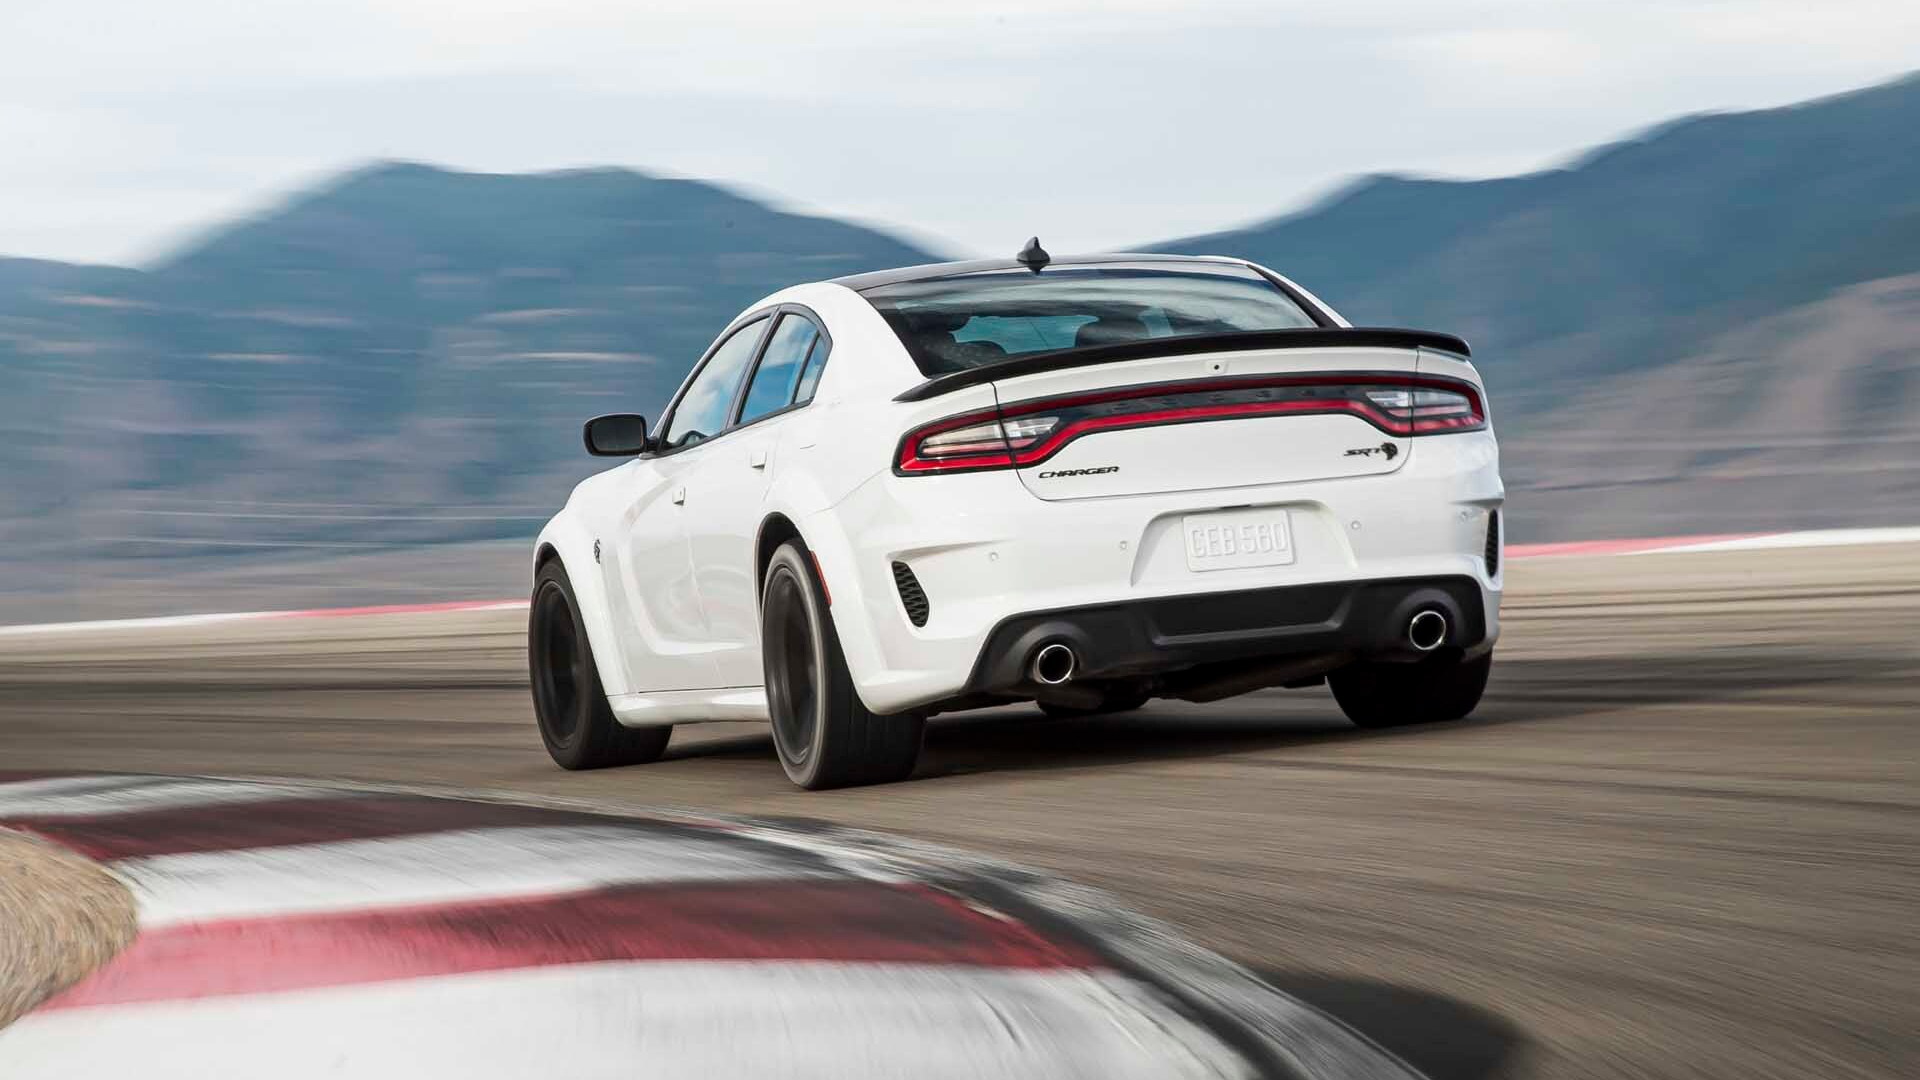 797 Horsepower 2021 Dodge Charger Srt Hellcat Redeye Is Here To Pick Up The Kids